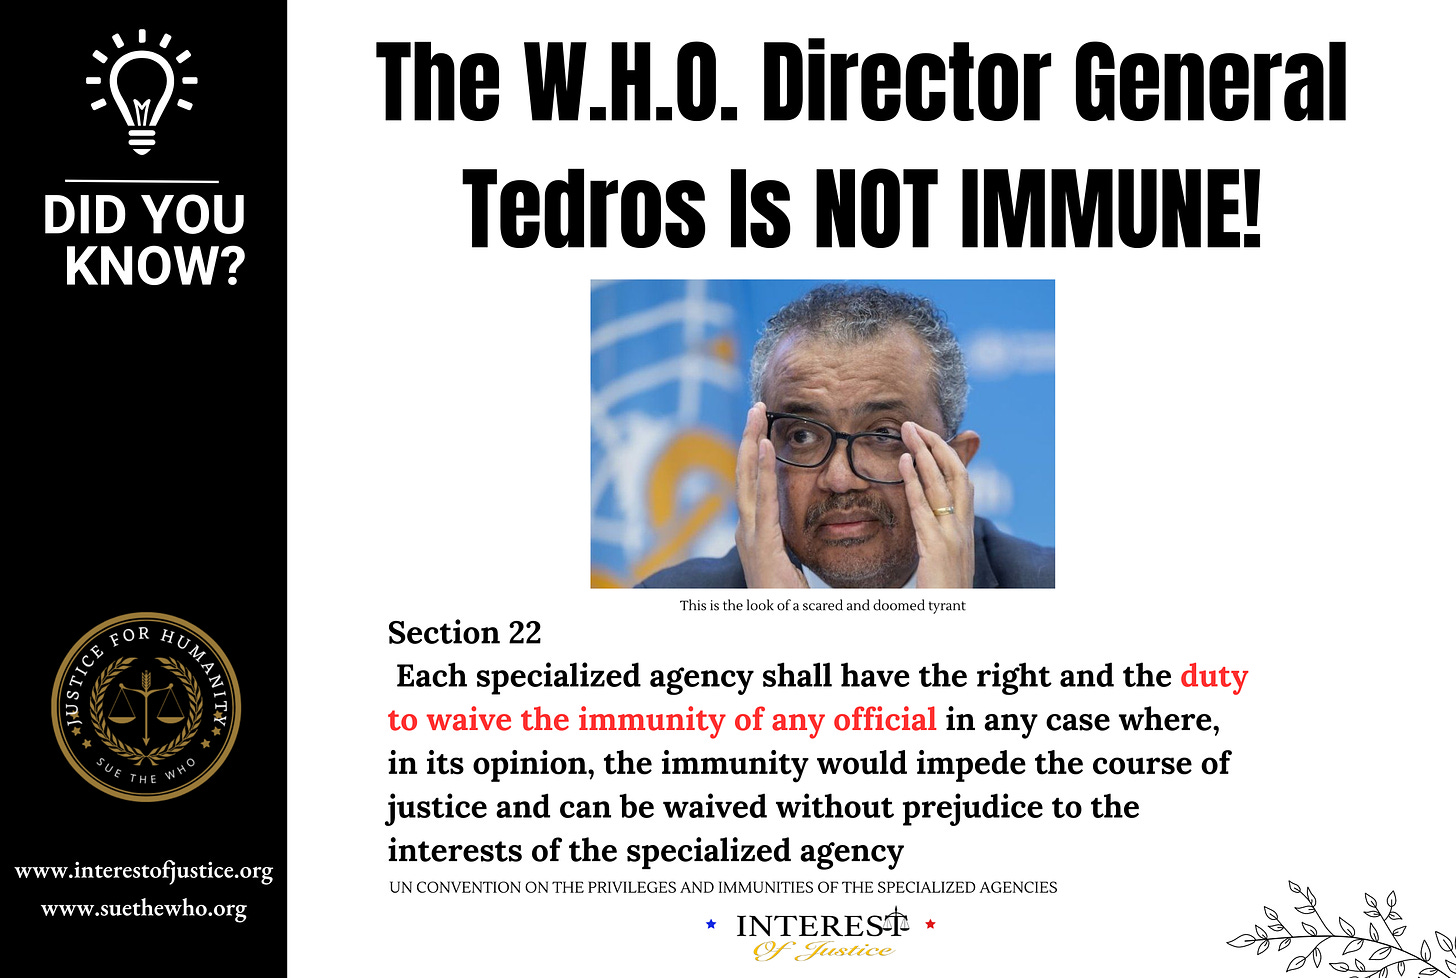 Sign Now To Demand the 76th WHA Respond To IOJ's Unanswered Criminal Charges Against WHO Director General Tedros. WHA Has A Duty To Terminate Tedros On The Spot Without Benefits & Prosecute! SHARE!